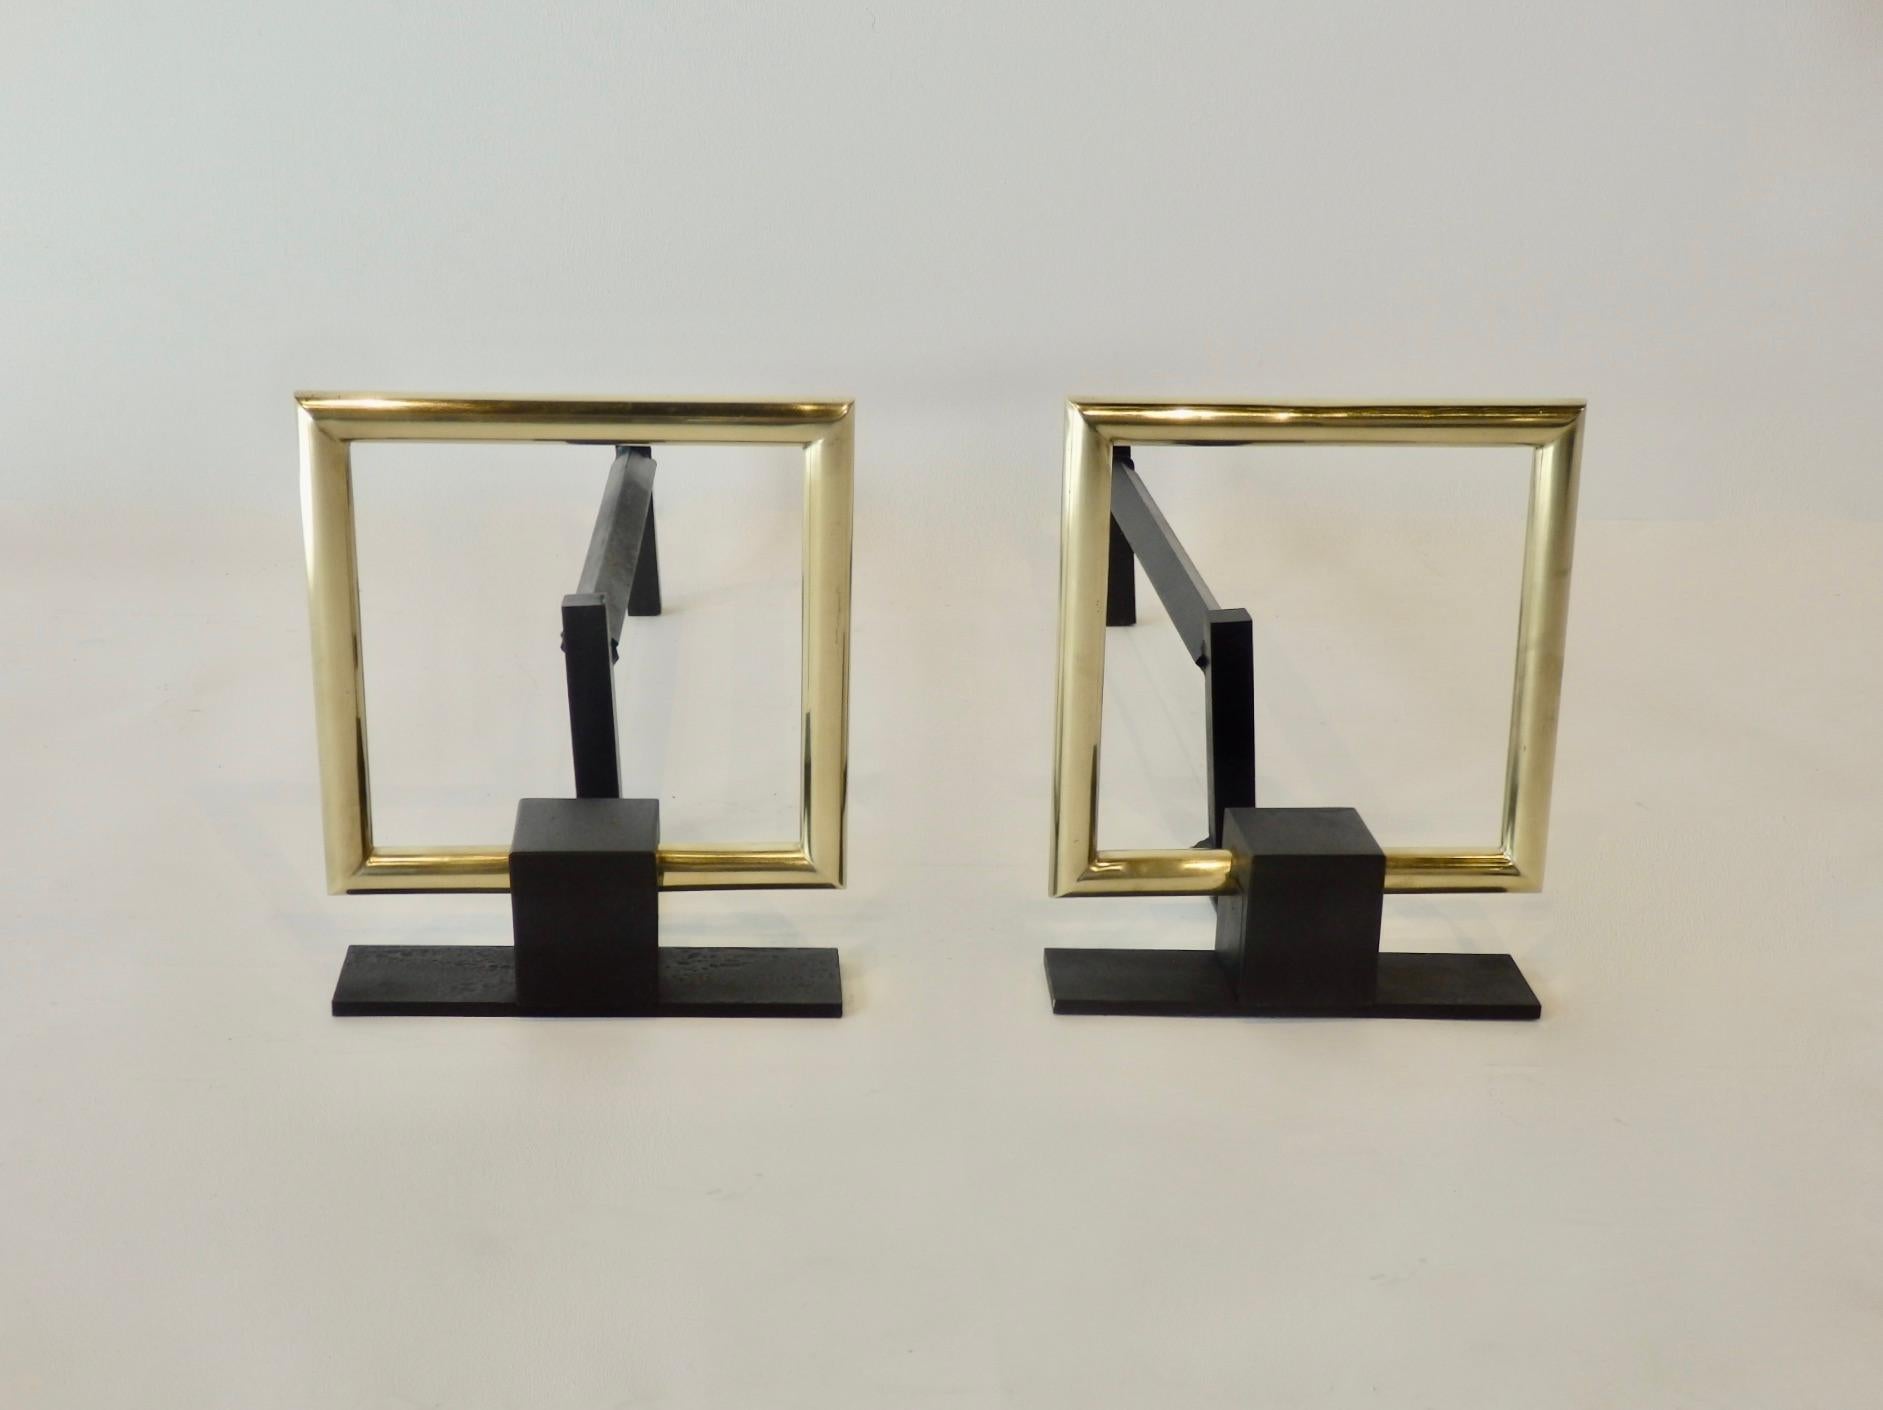 20th Century Donald Deskey Style Polished Brass and Steel Art Deco Fireplace Andirons For Sale